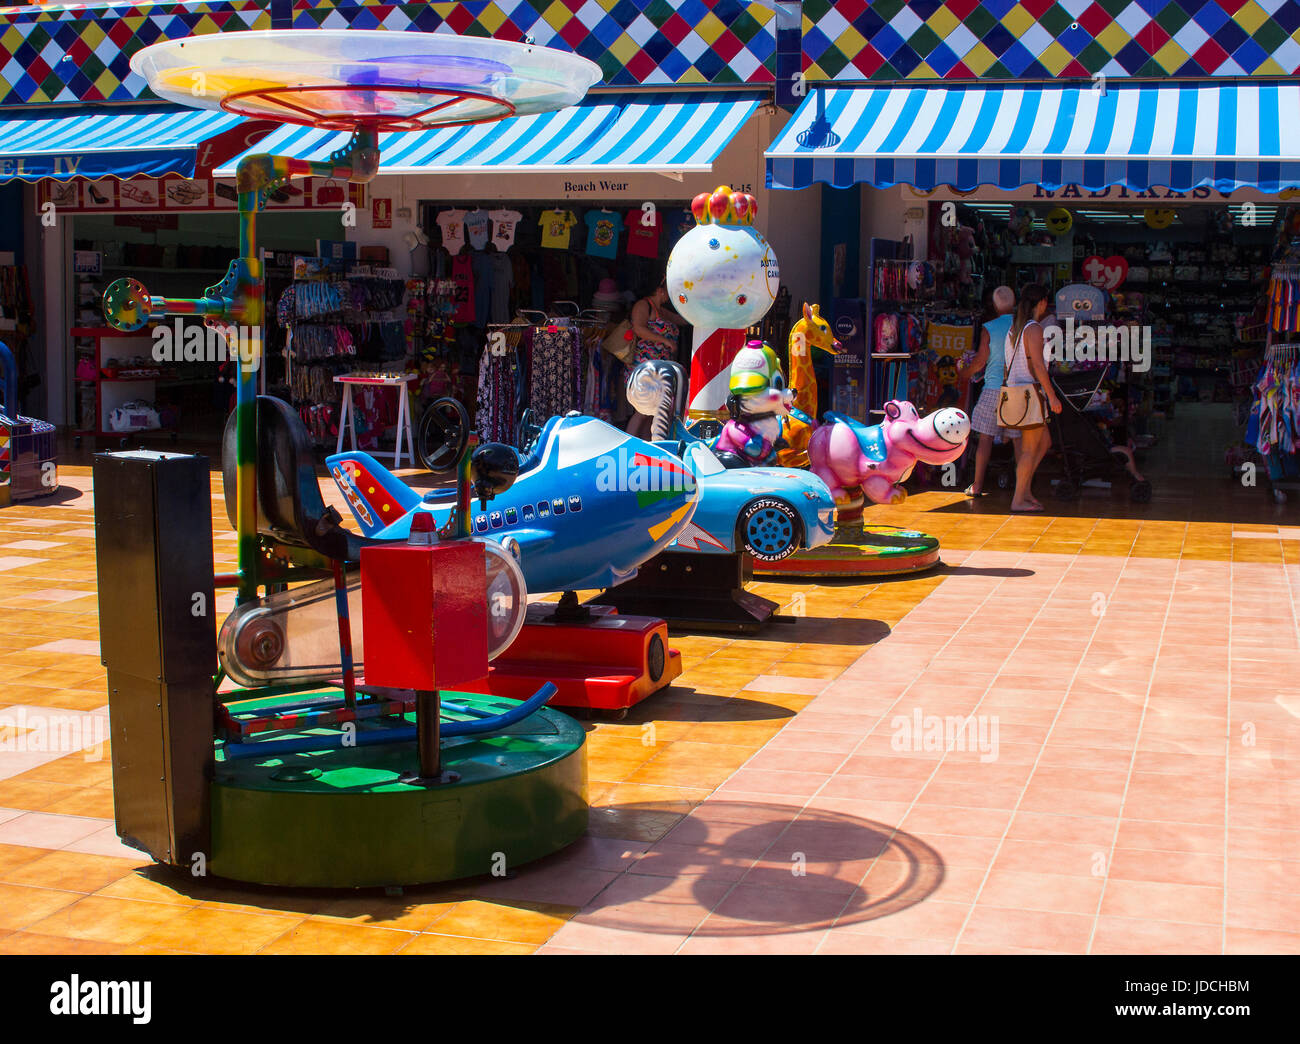 A selection of colorful electric powered sit on rides for infants and toddlers in an amusement centre in a local shopping mall in Playa Las Americas i Stock Photo